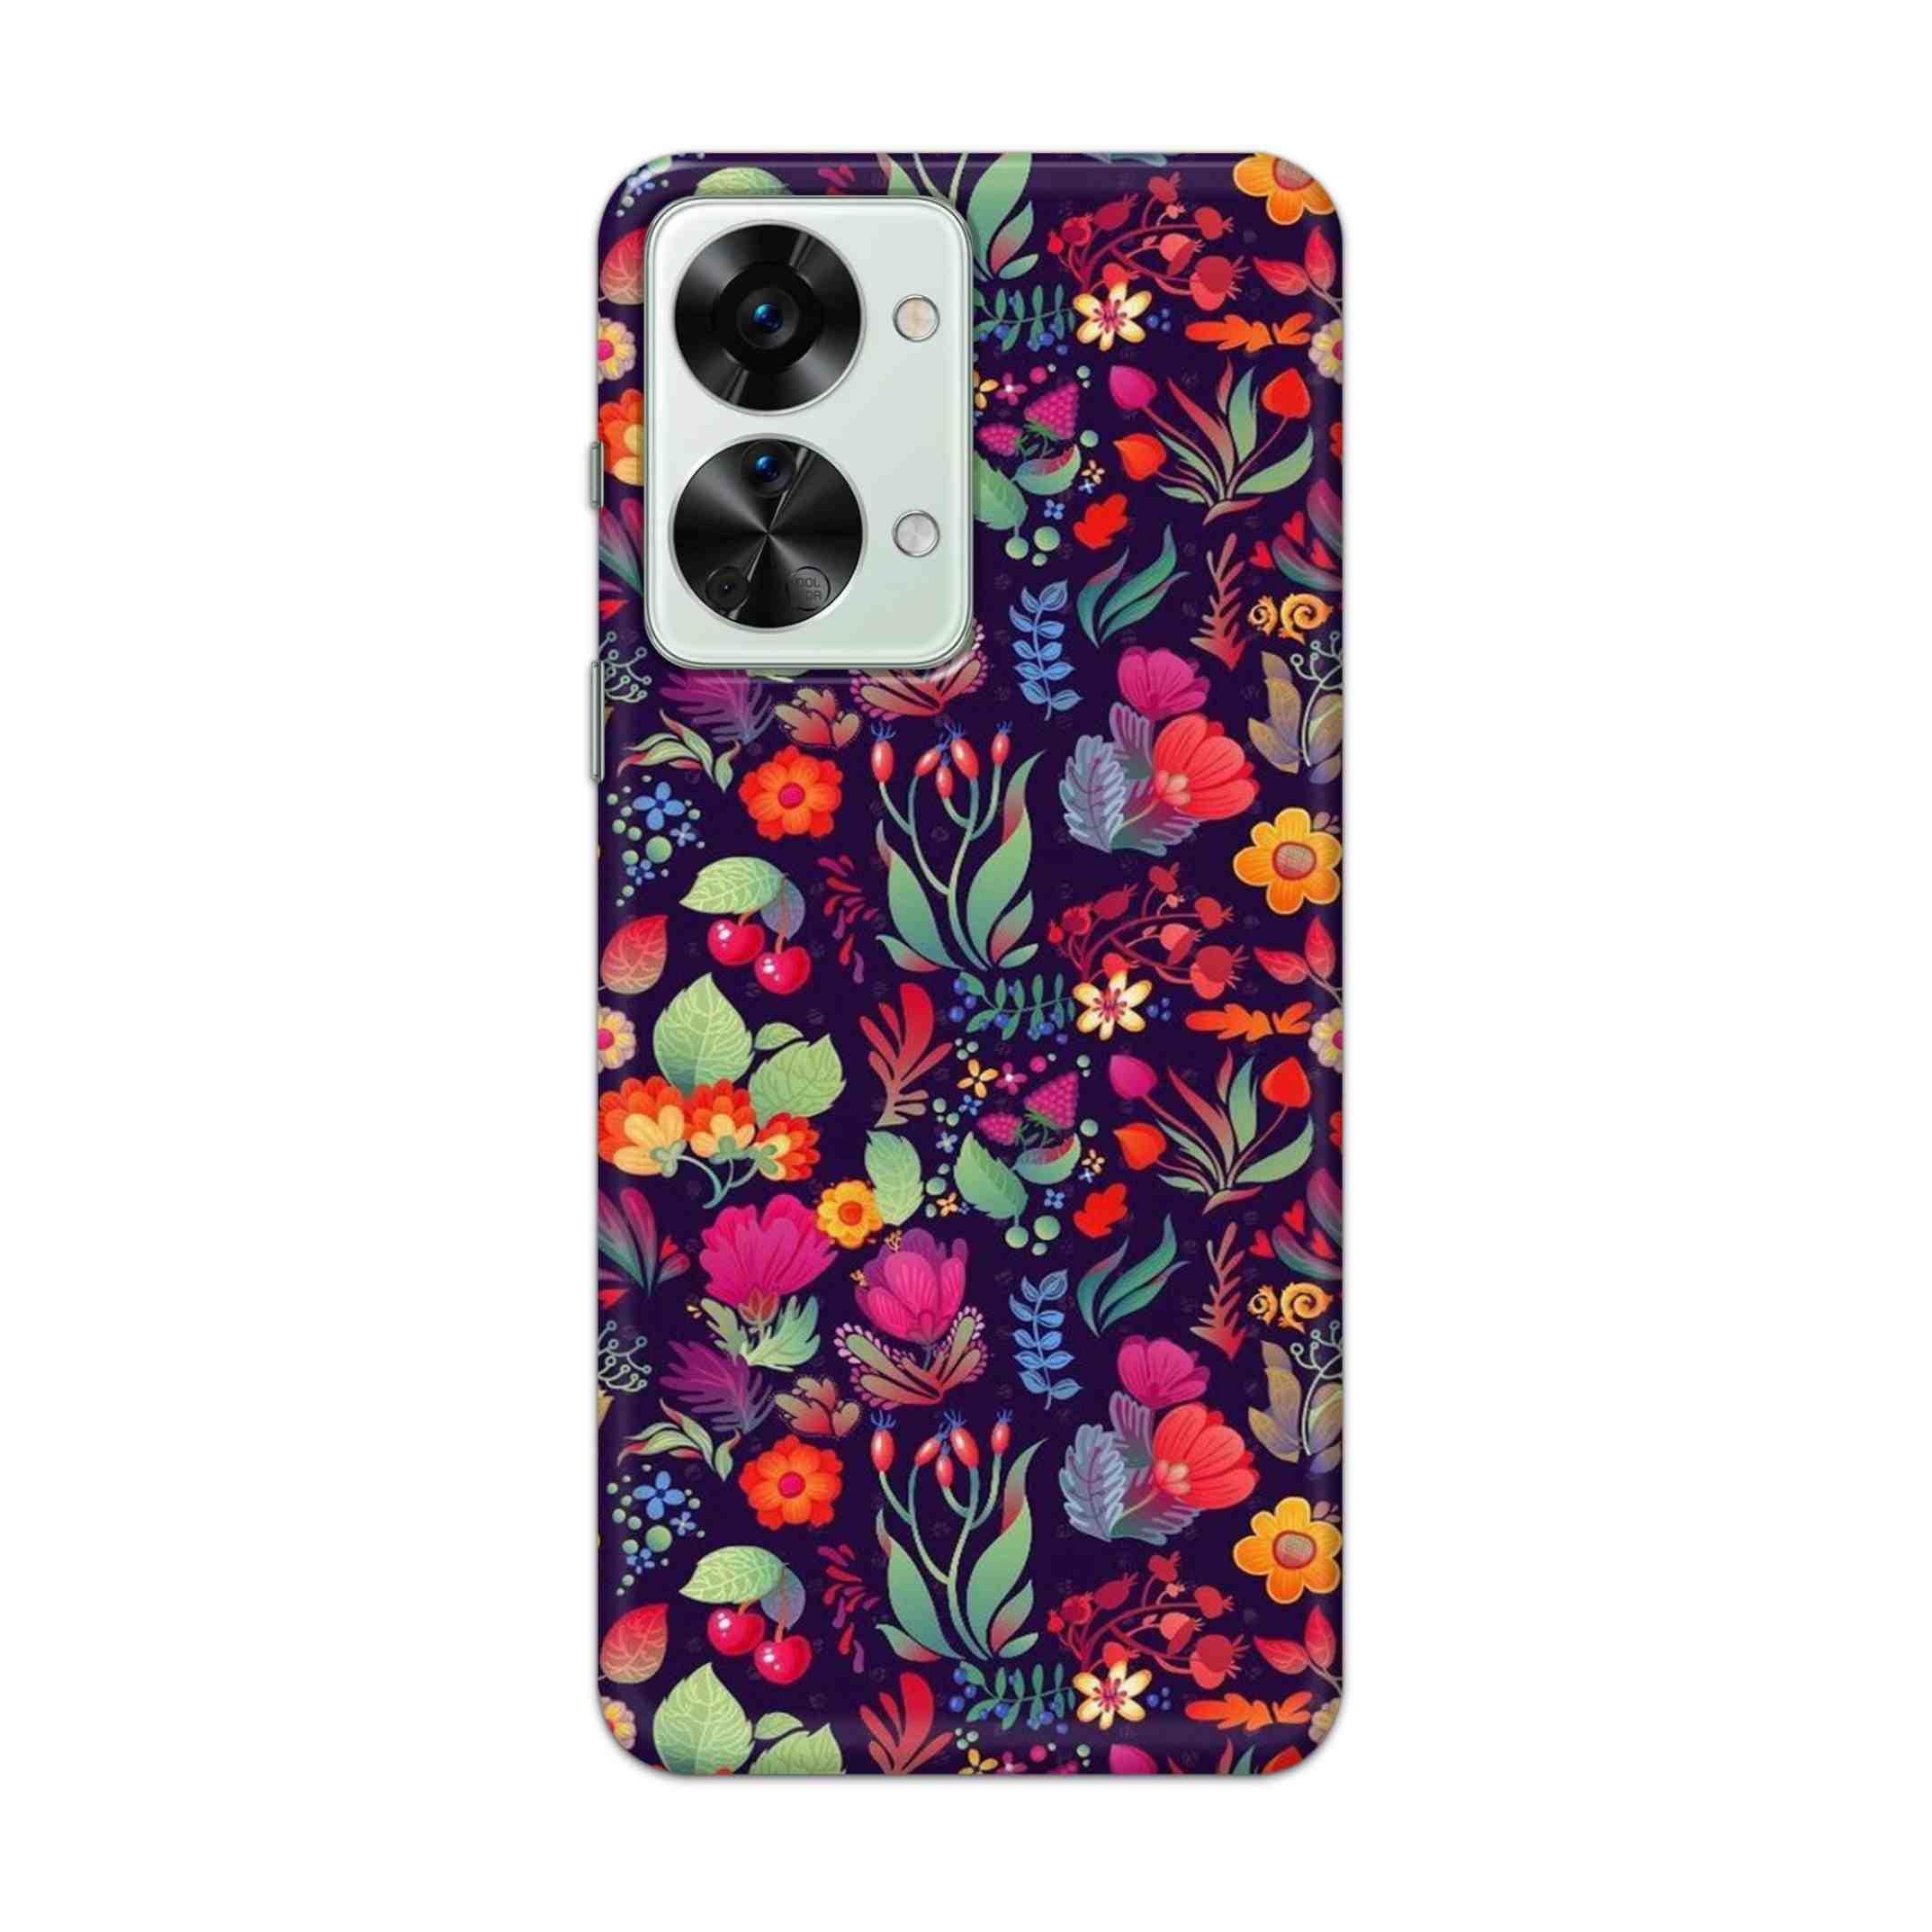 Buy Fruits Flower Hard Back Mobile Phone Case Cover For OnePlus Nord 2T 5G Online